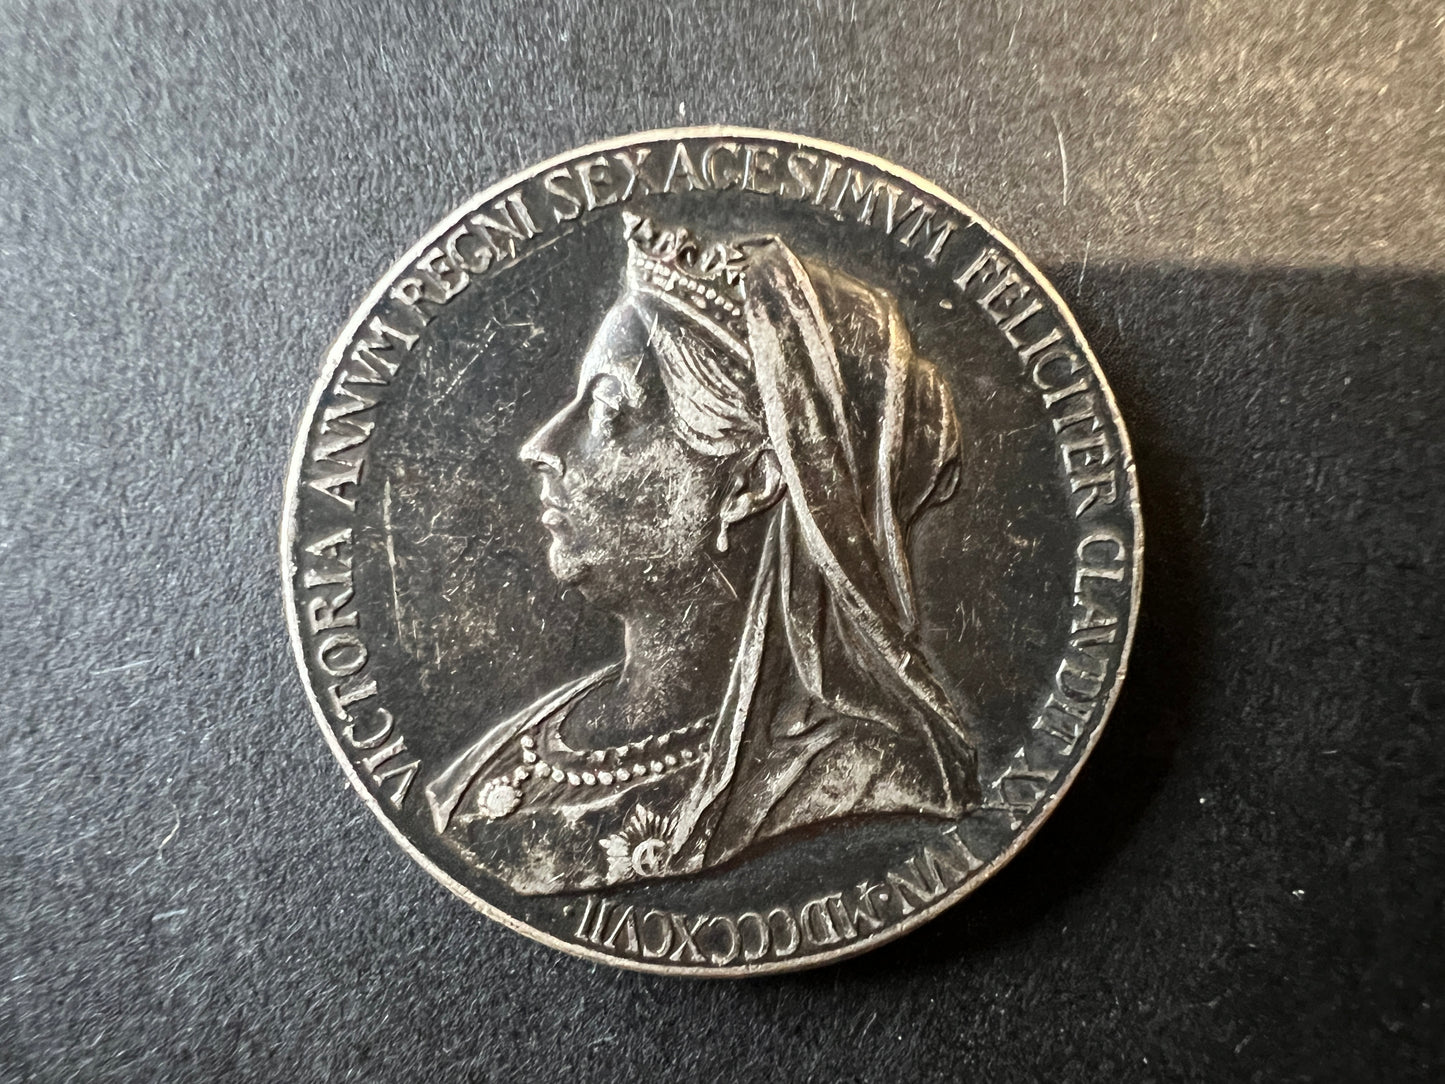 1897 Diamond Jubilee Queen Victoria medal - Young Victoria on one side, Old Victoria on the other